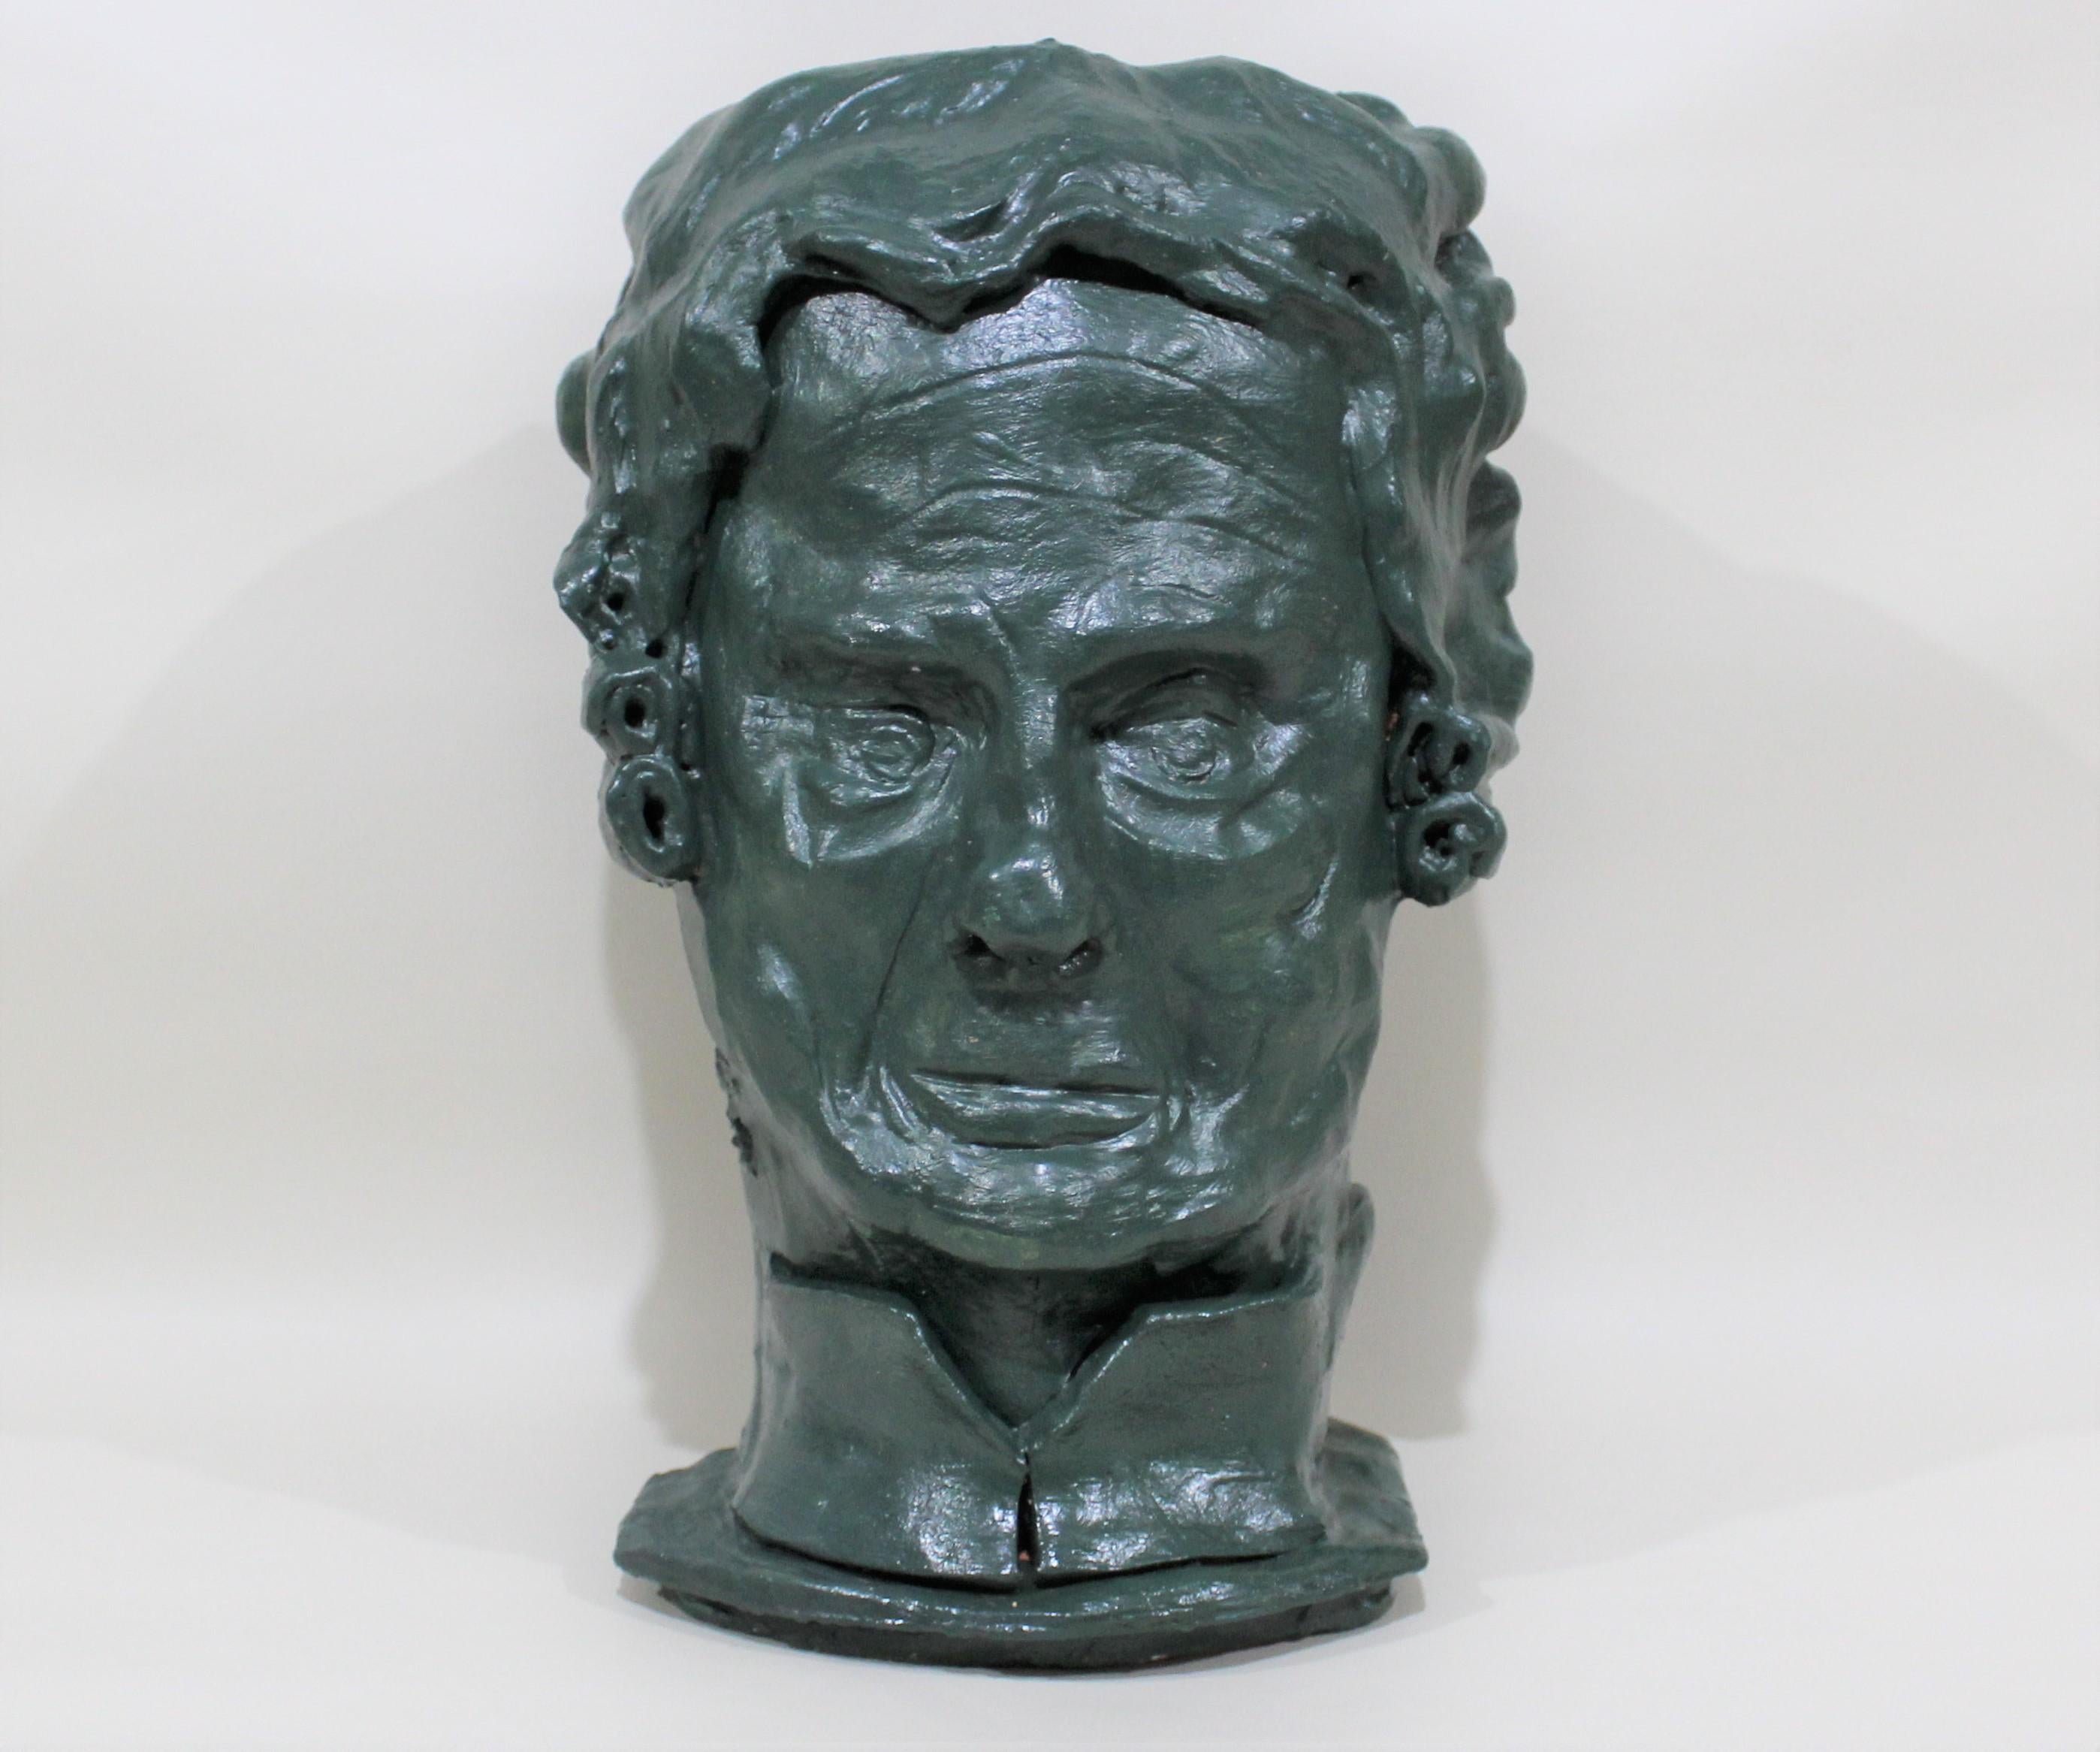 Double Faced Terracotta Sculpture of 18th Century Opera Composers In Good Condition For Sale In Hamilton, Ontario